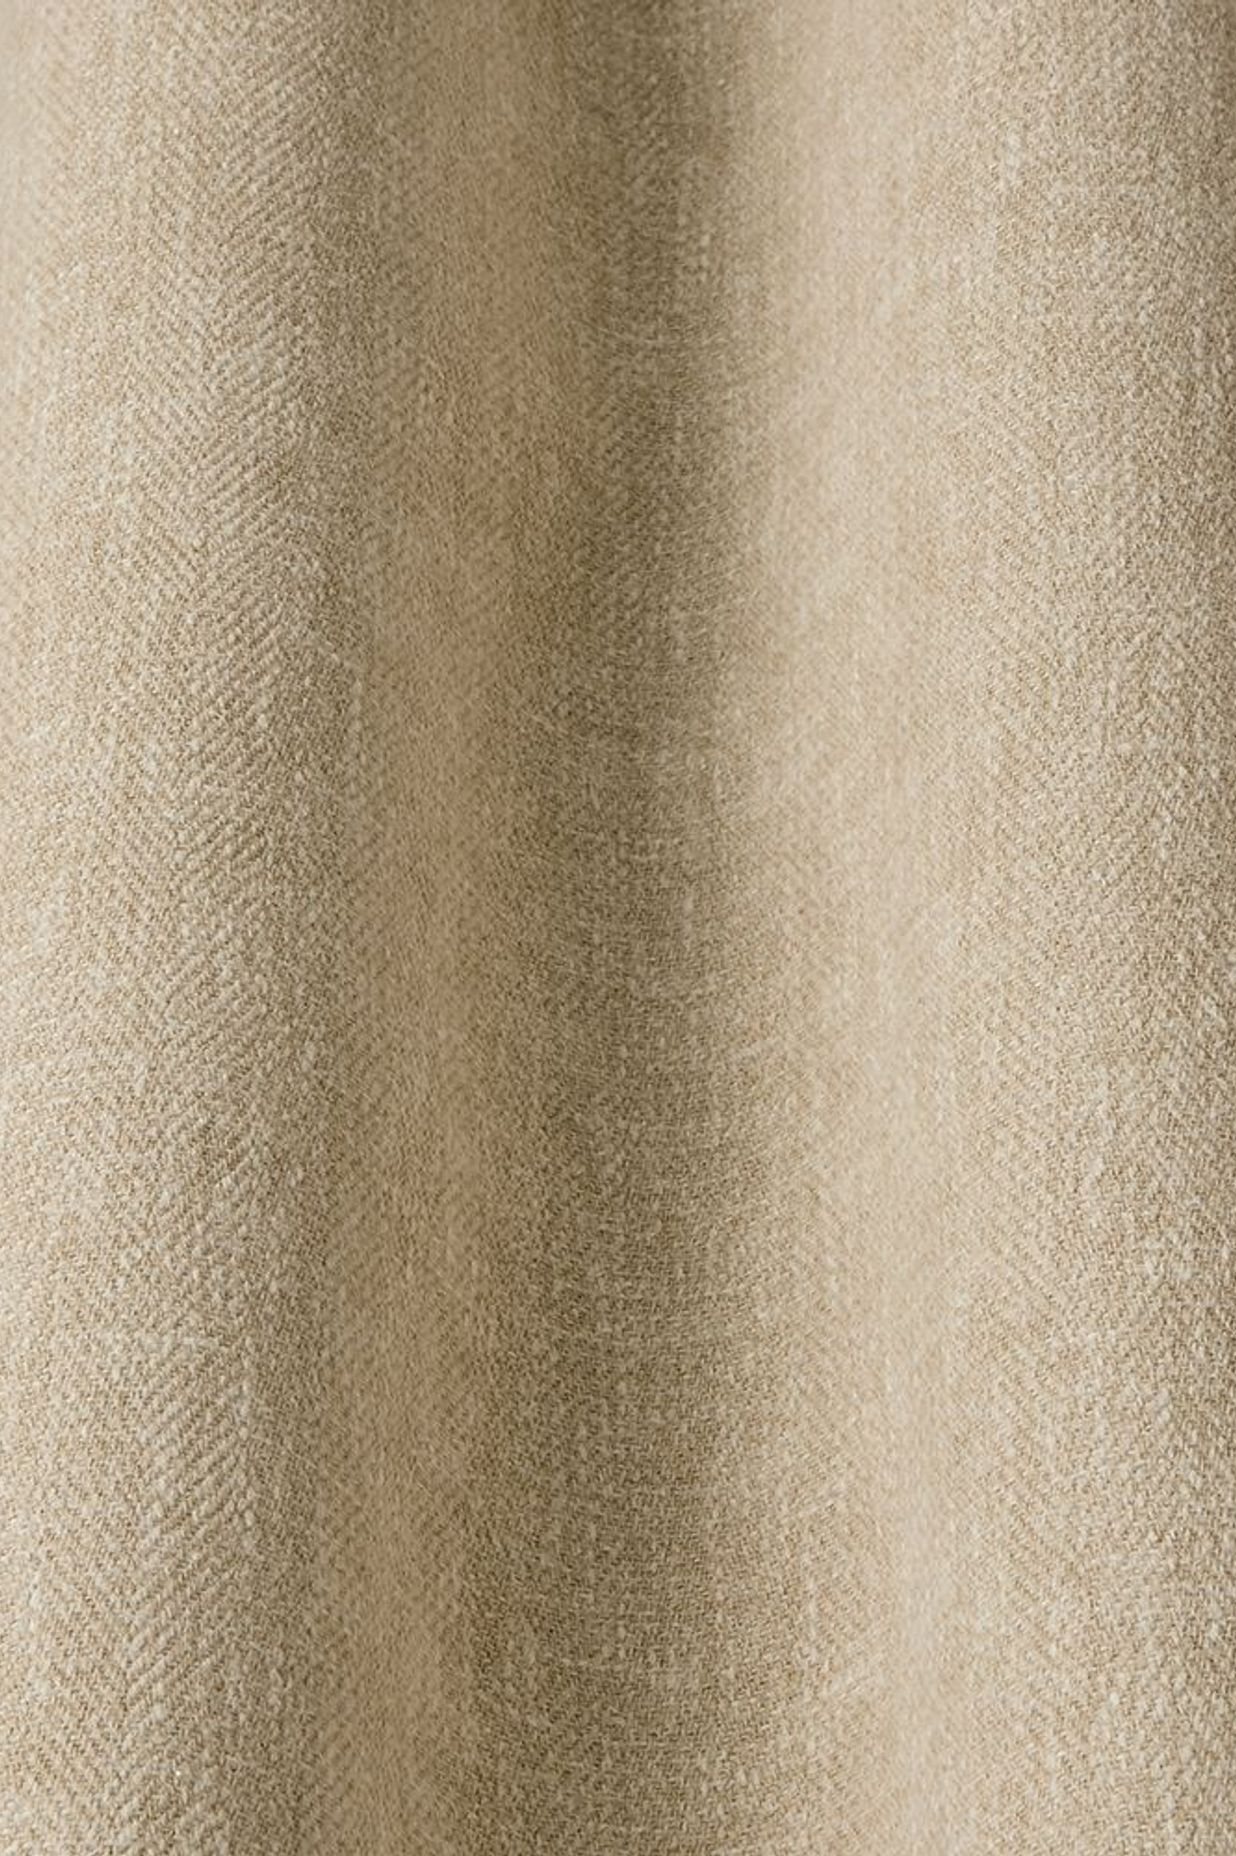 Jovonna Buttermilk from the Sustainable Plains 1 collection by ILIV.